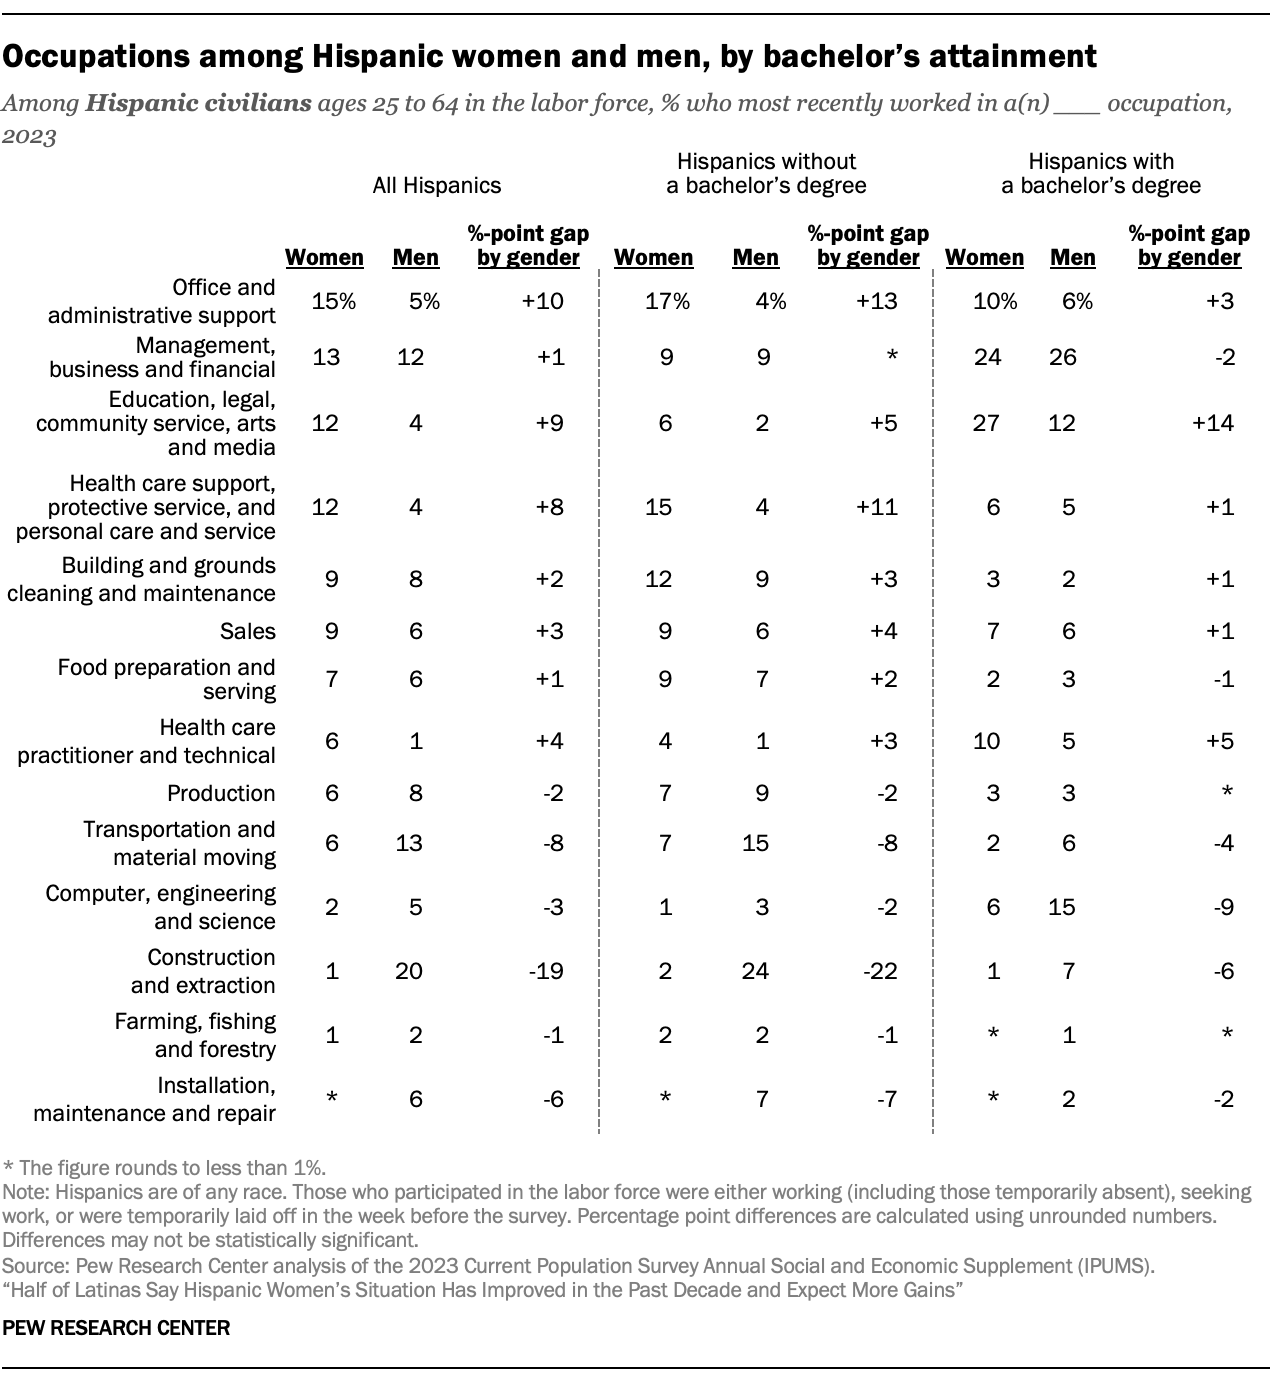 A table showing occupations among Hispanic women and men by bachelor’s attainment.